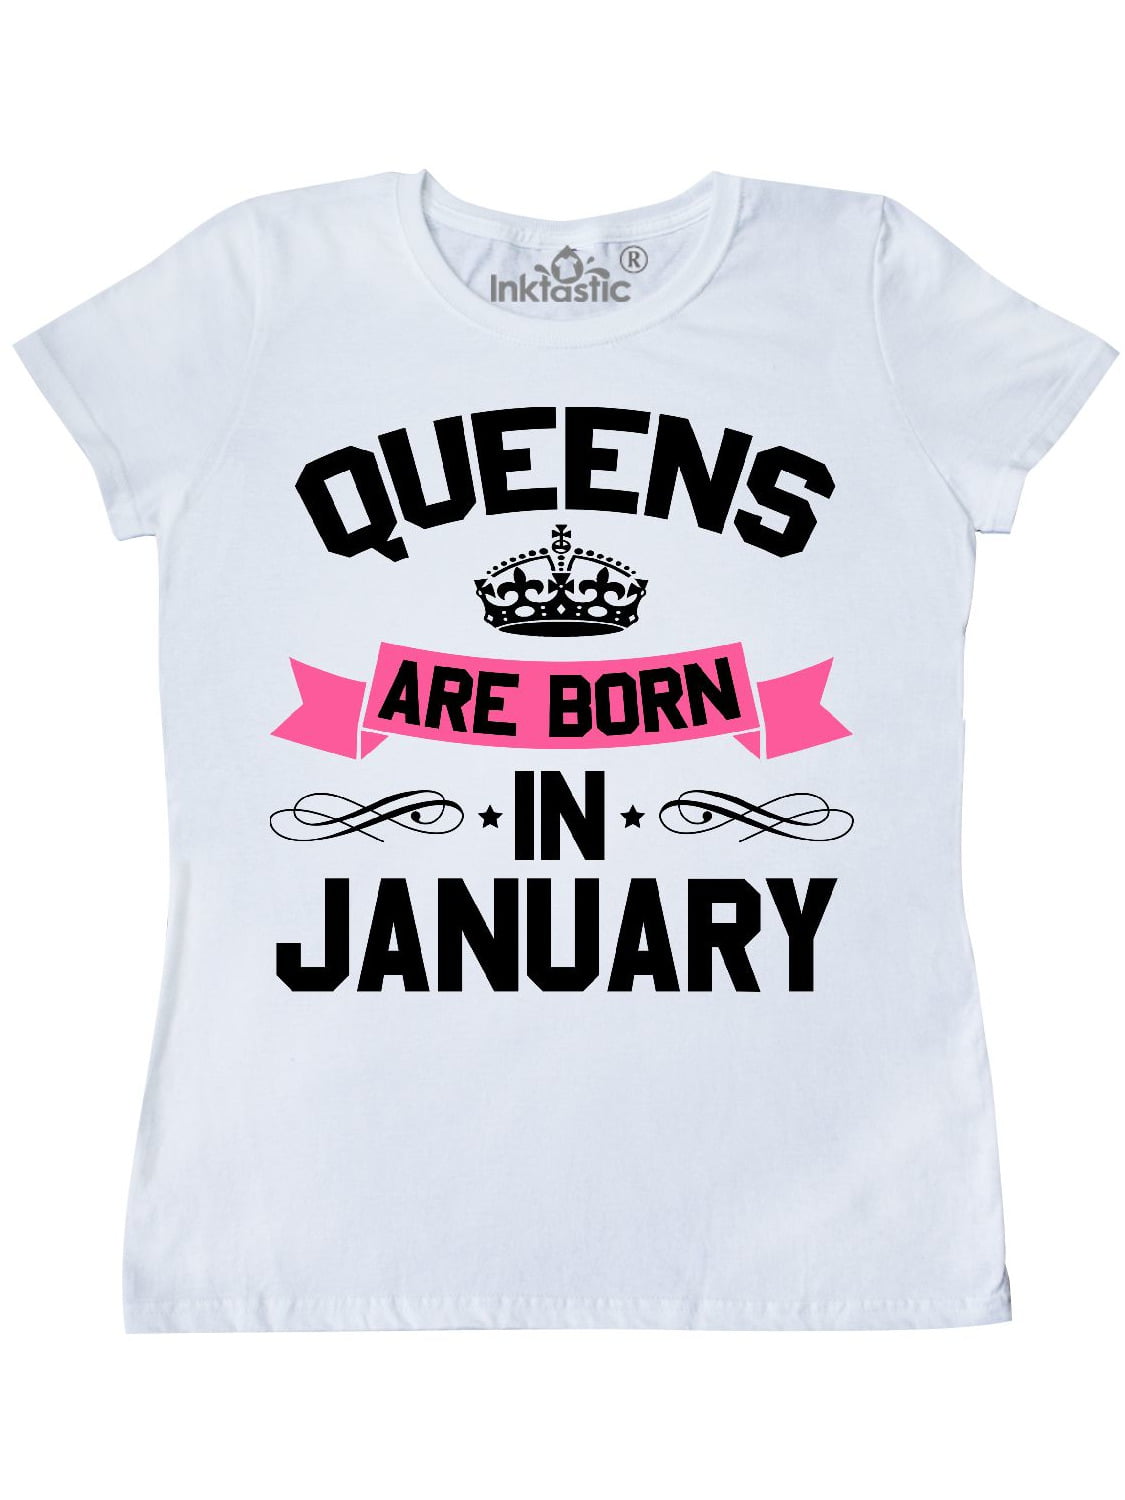 Details about   1Tee Womens Queens are born in January  T-Shirt